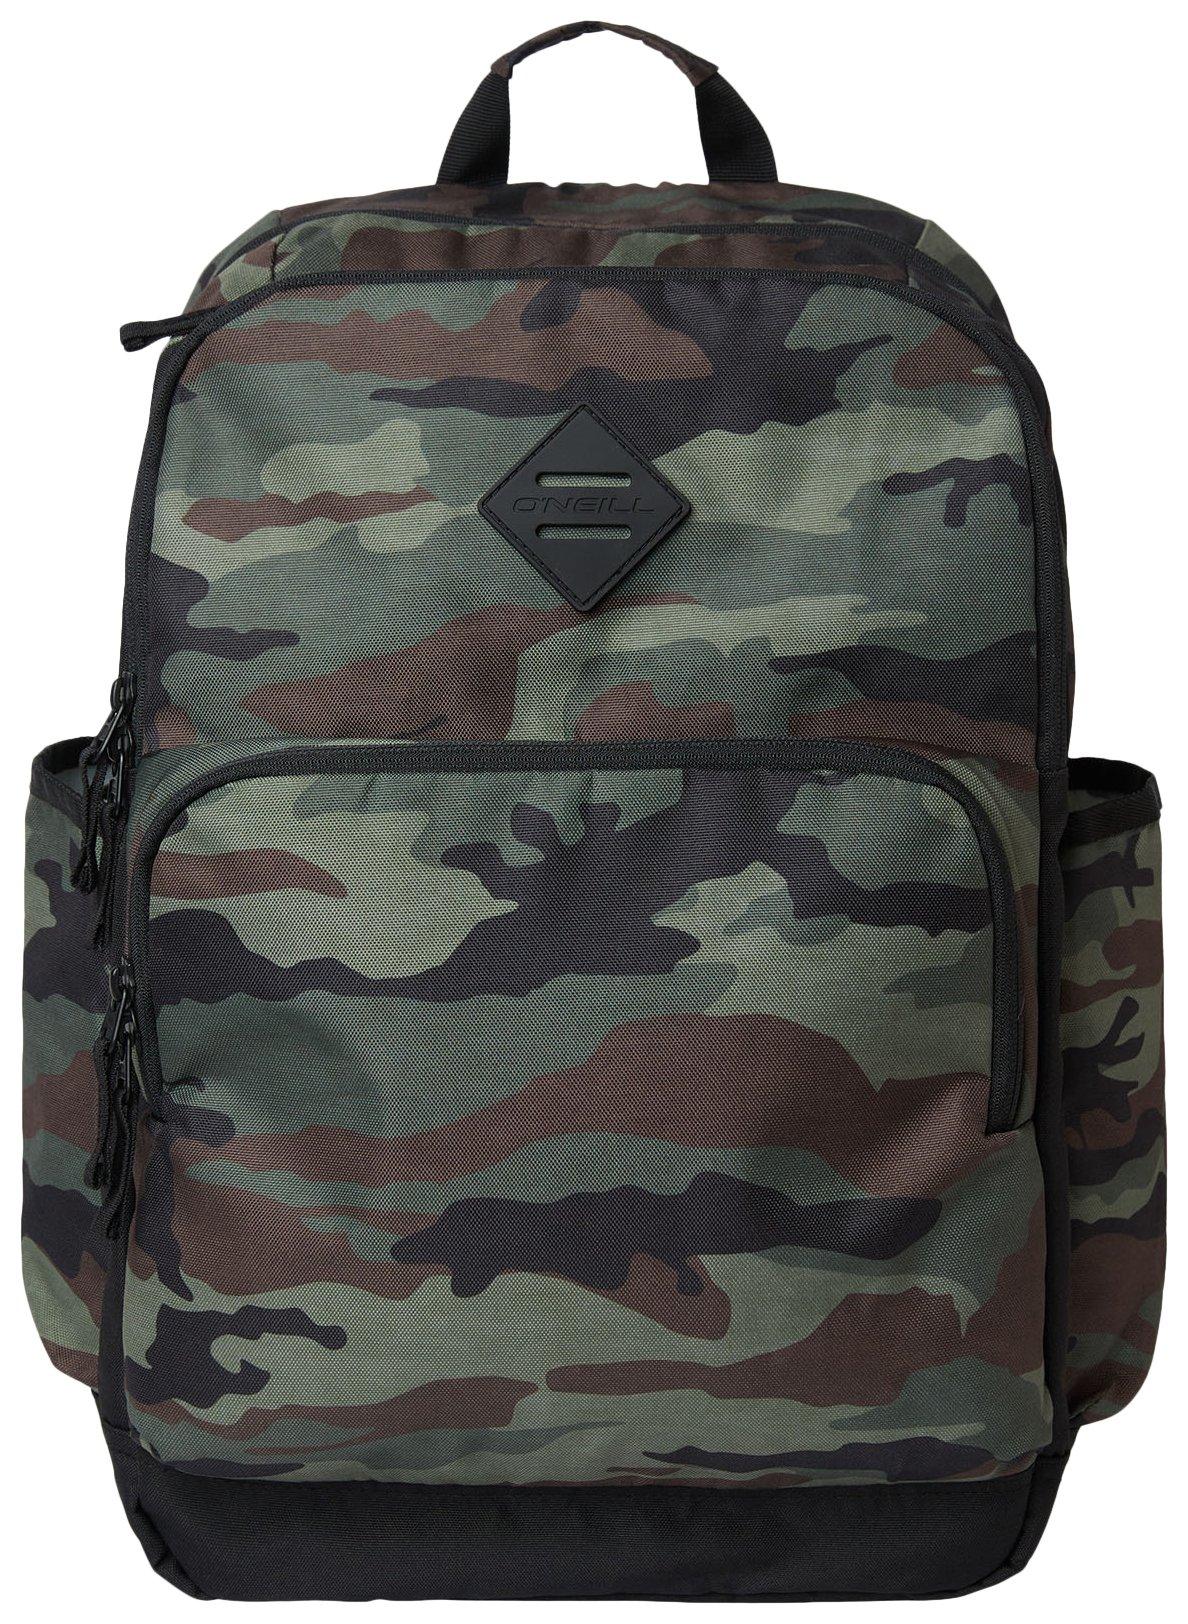 Camouflage Poly Canvas School Bag Backpack